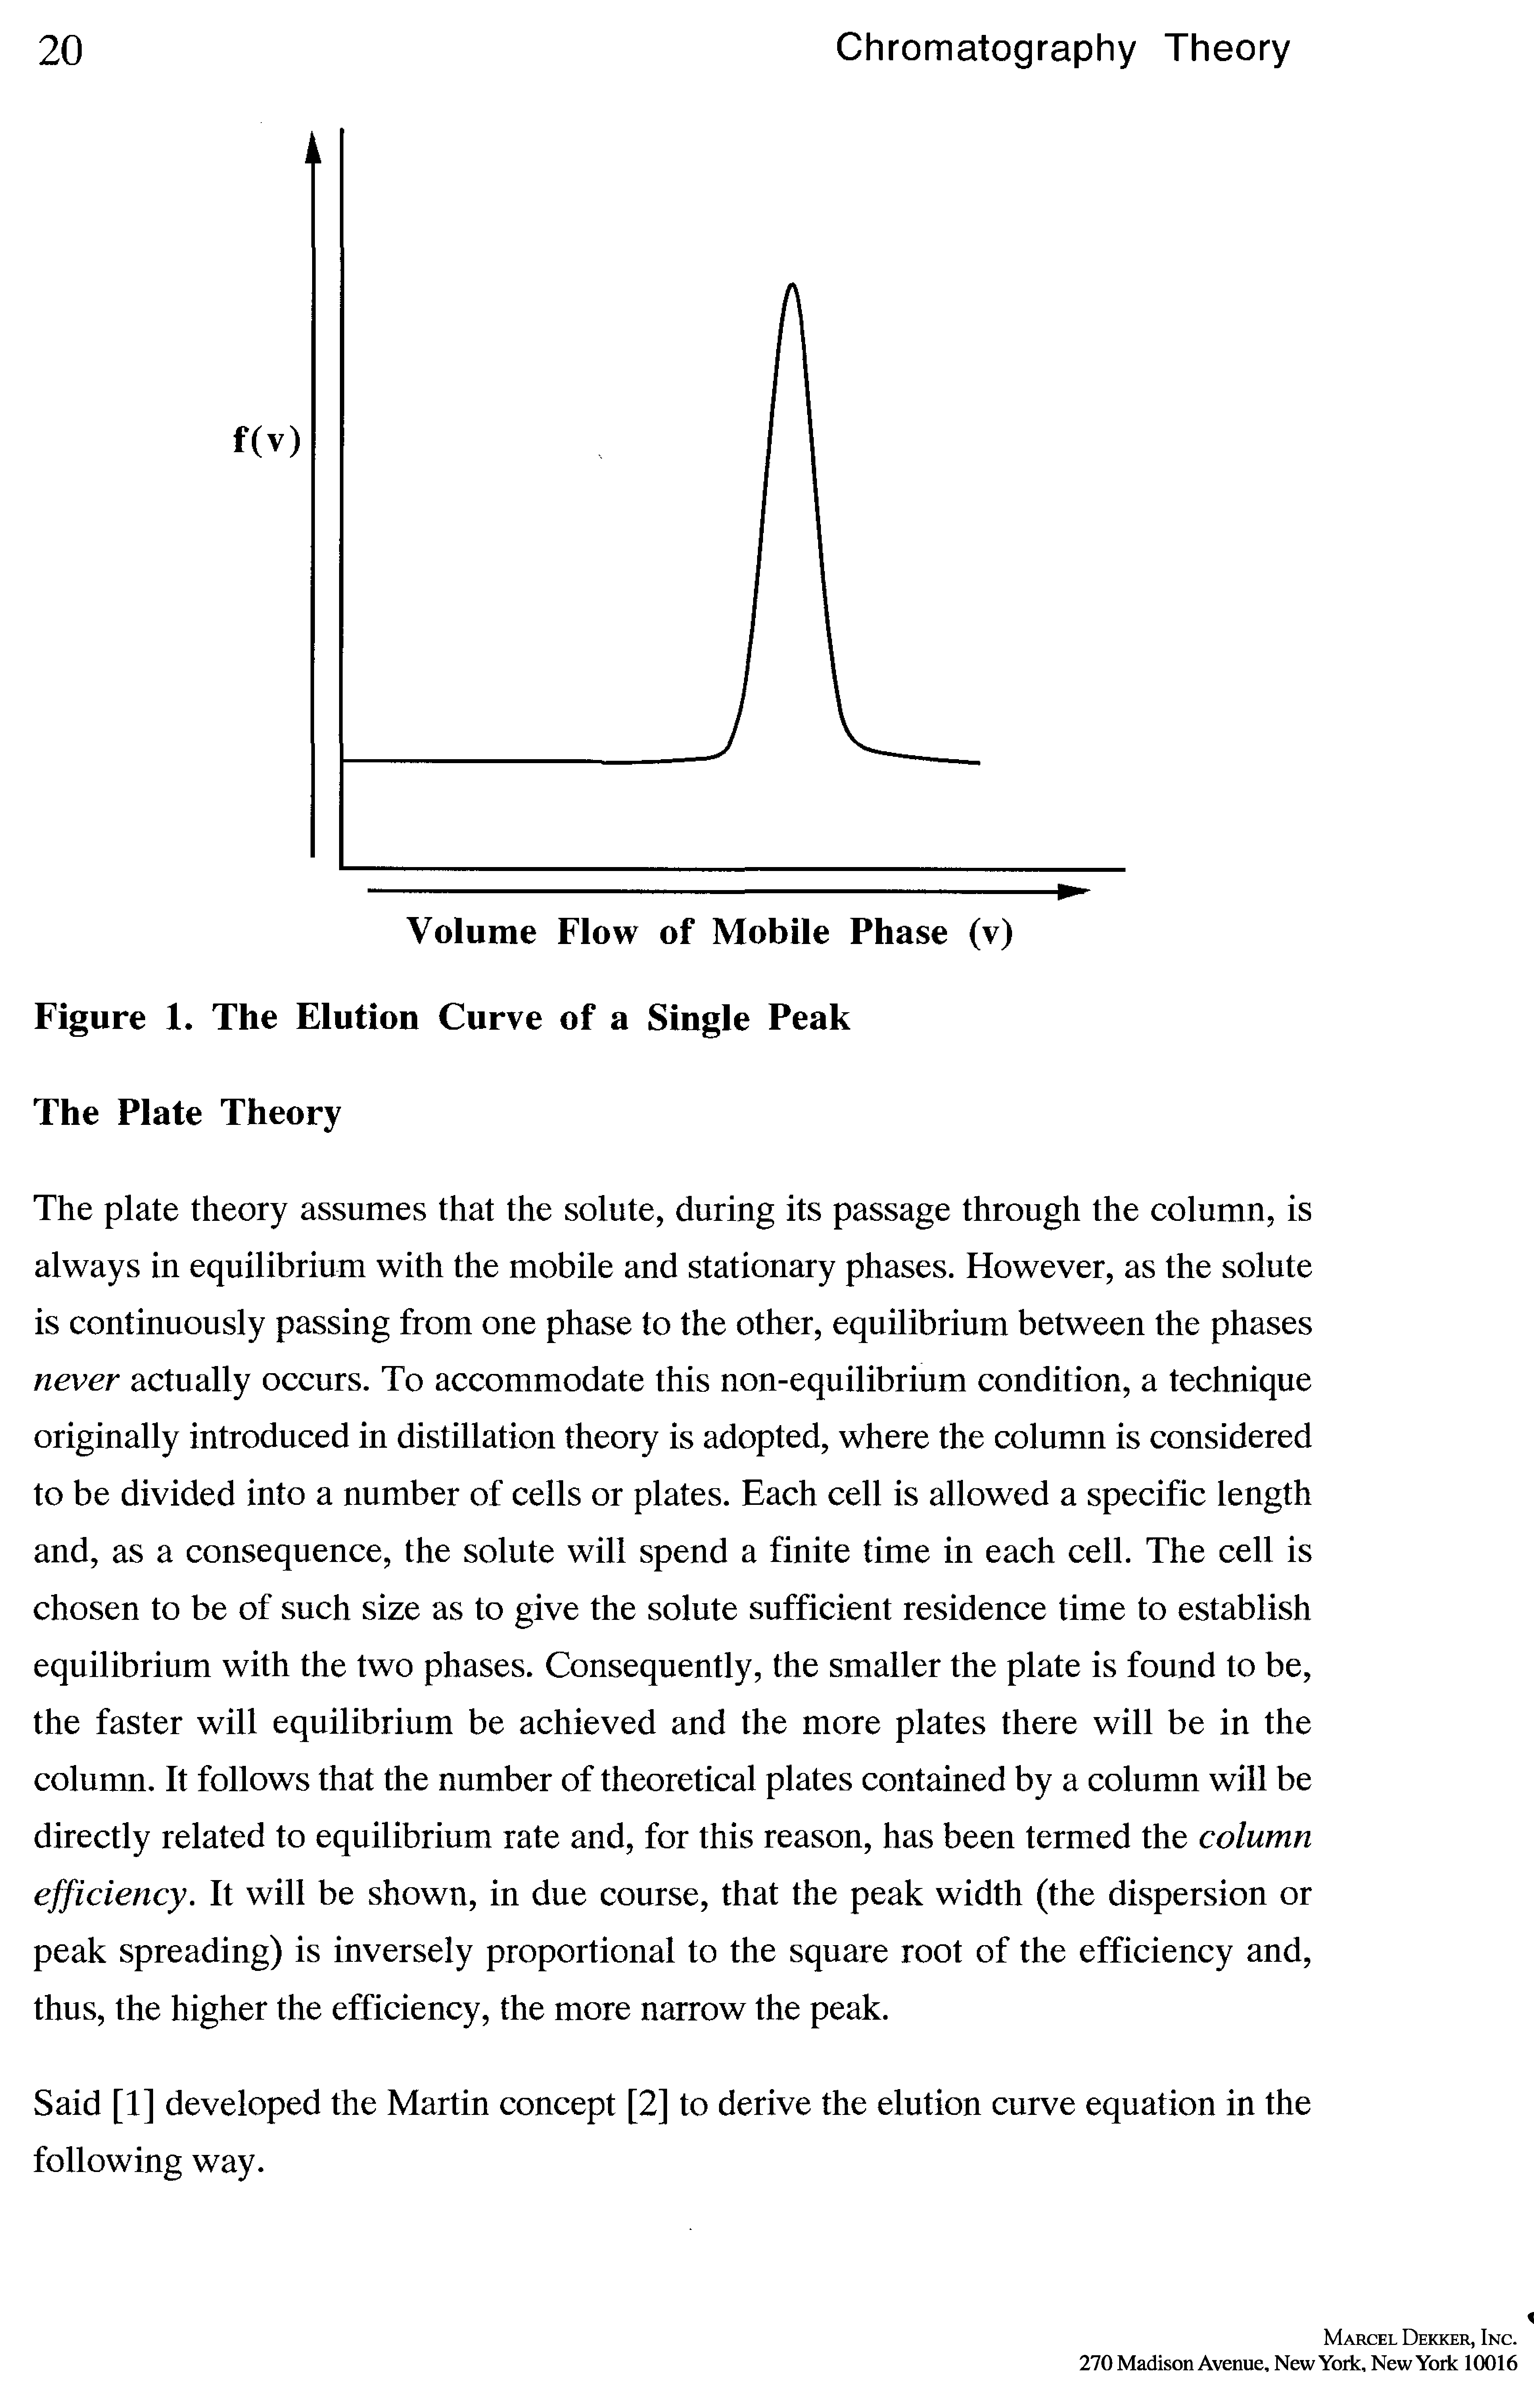 Figure 1. The Elution Curve of a Single Peak The Plate Theory...